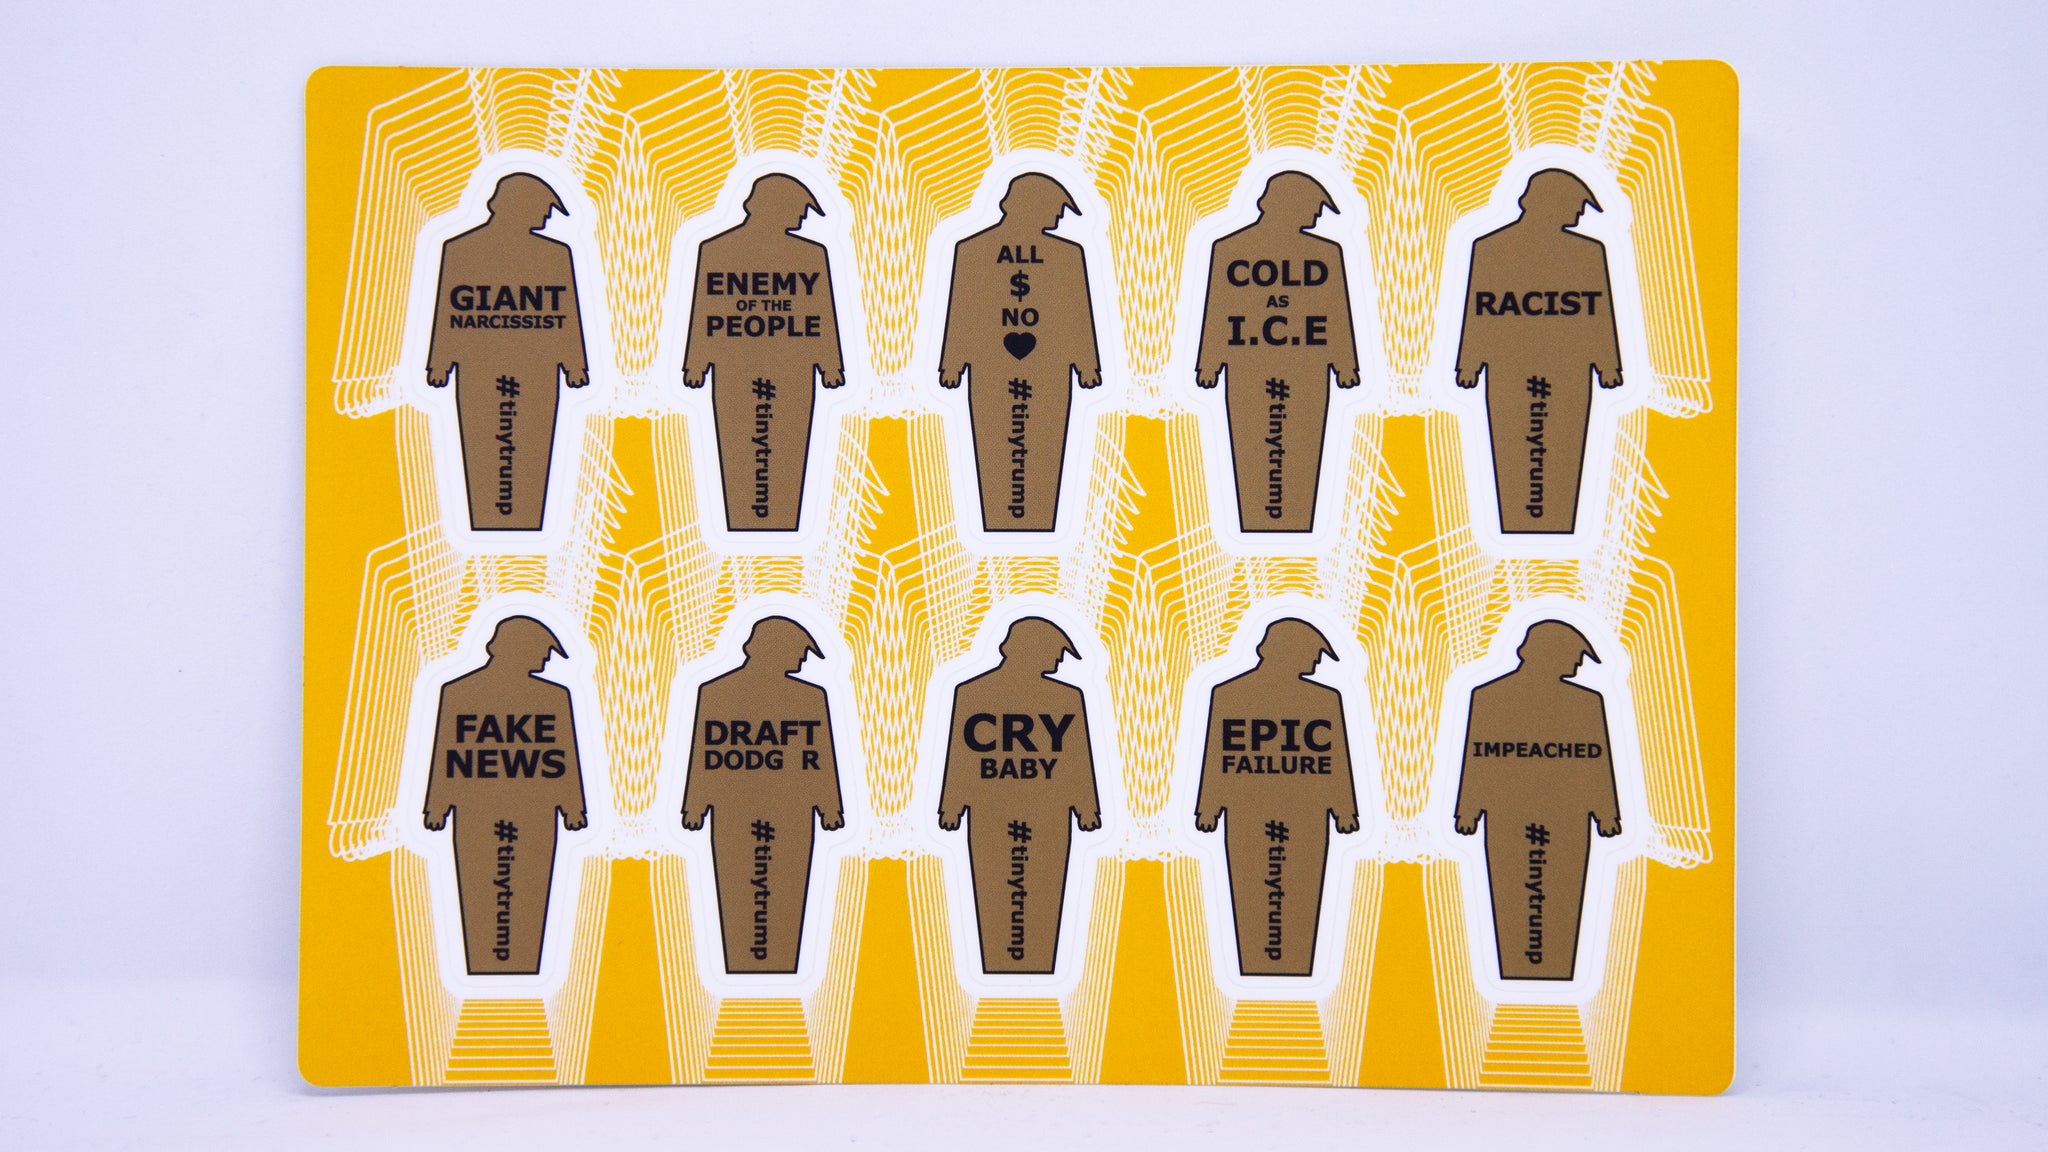 A sticker sheet with 10, two inch tall tiny trumps with the following slogans: Giant Narcissist, Enemy of the People, All $ no Heart, Cold as I.C.E, Racist, Fake News, Draft Dodger, Cry Baby, Epic Failure, Impeached